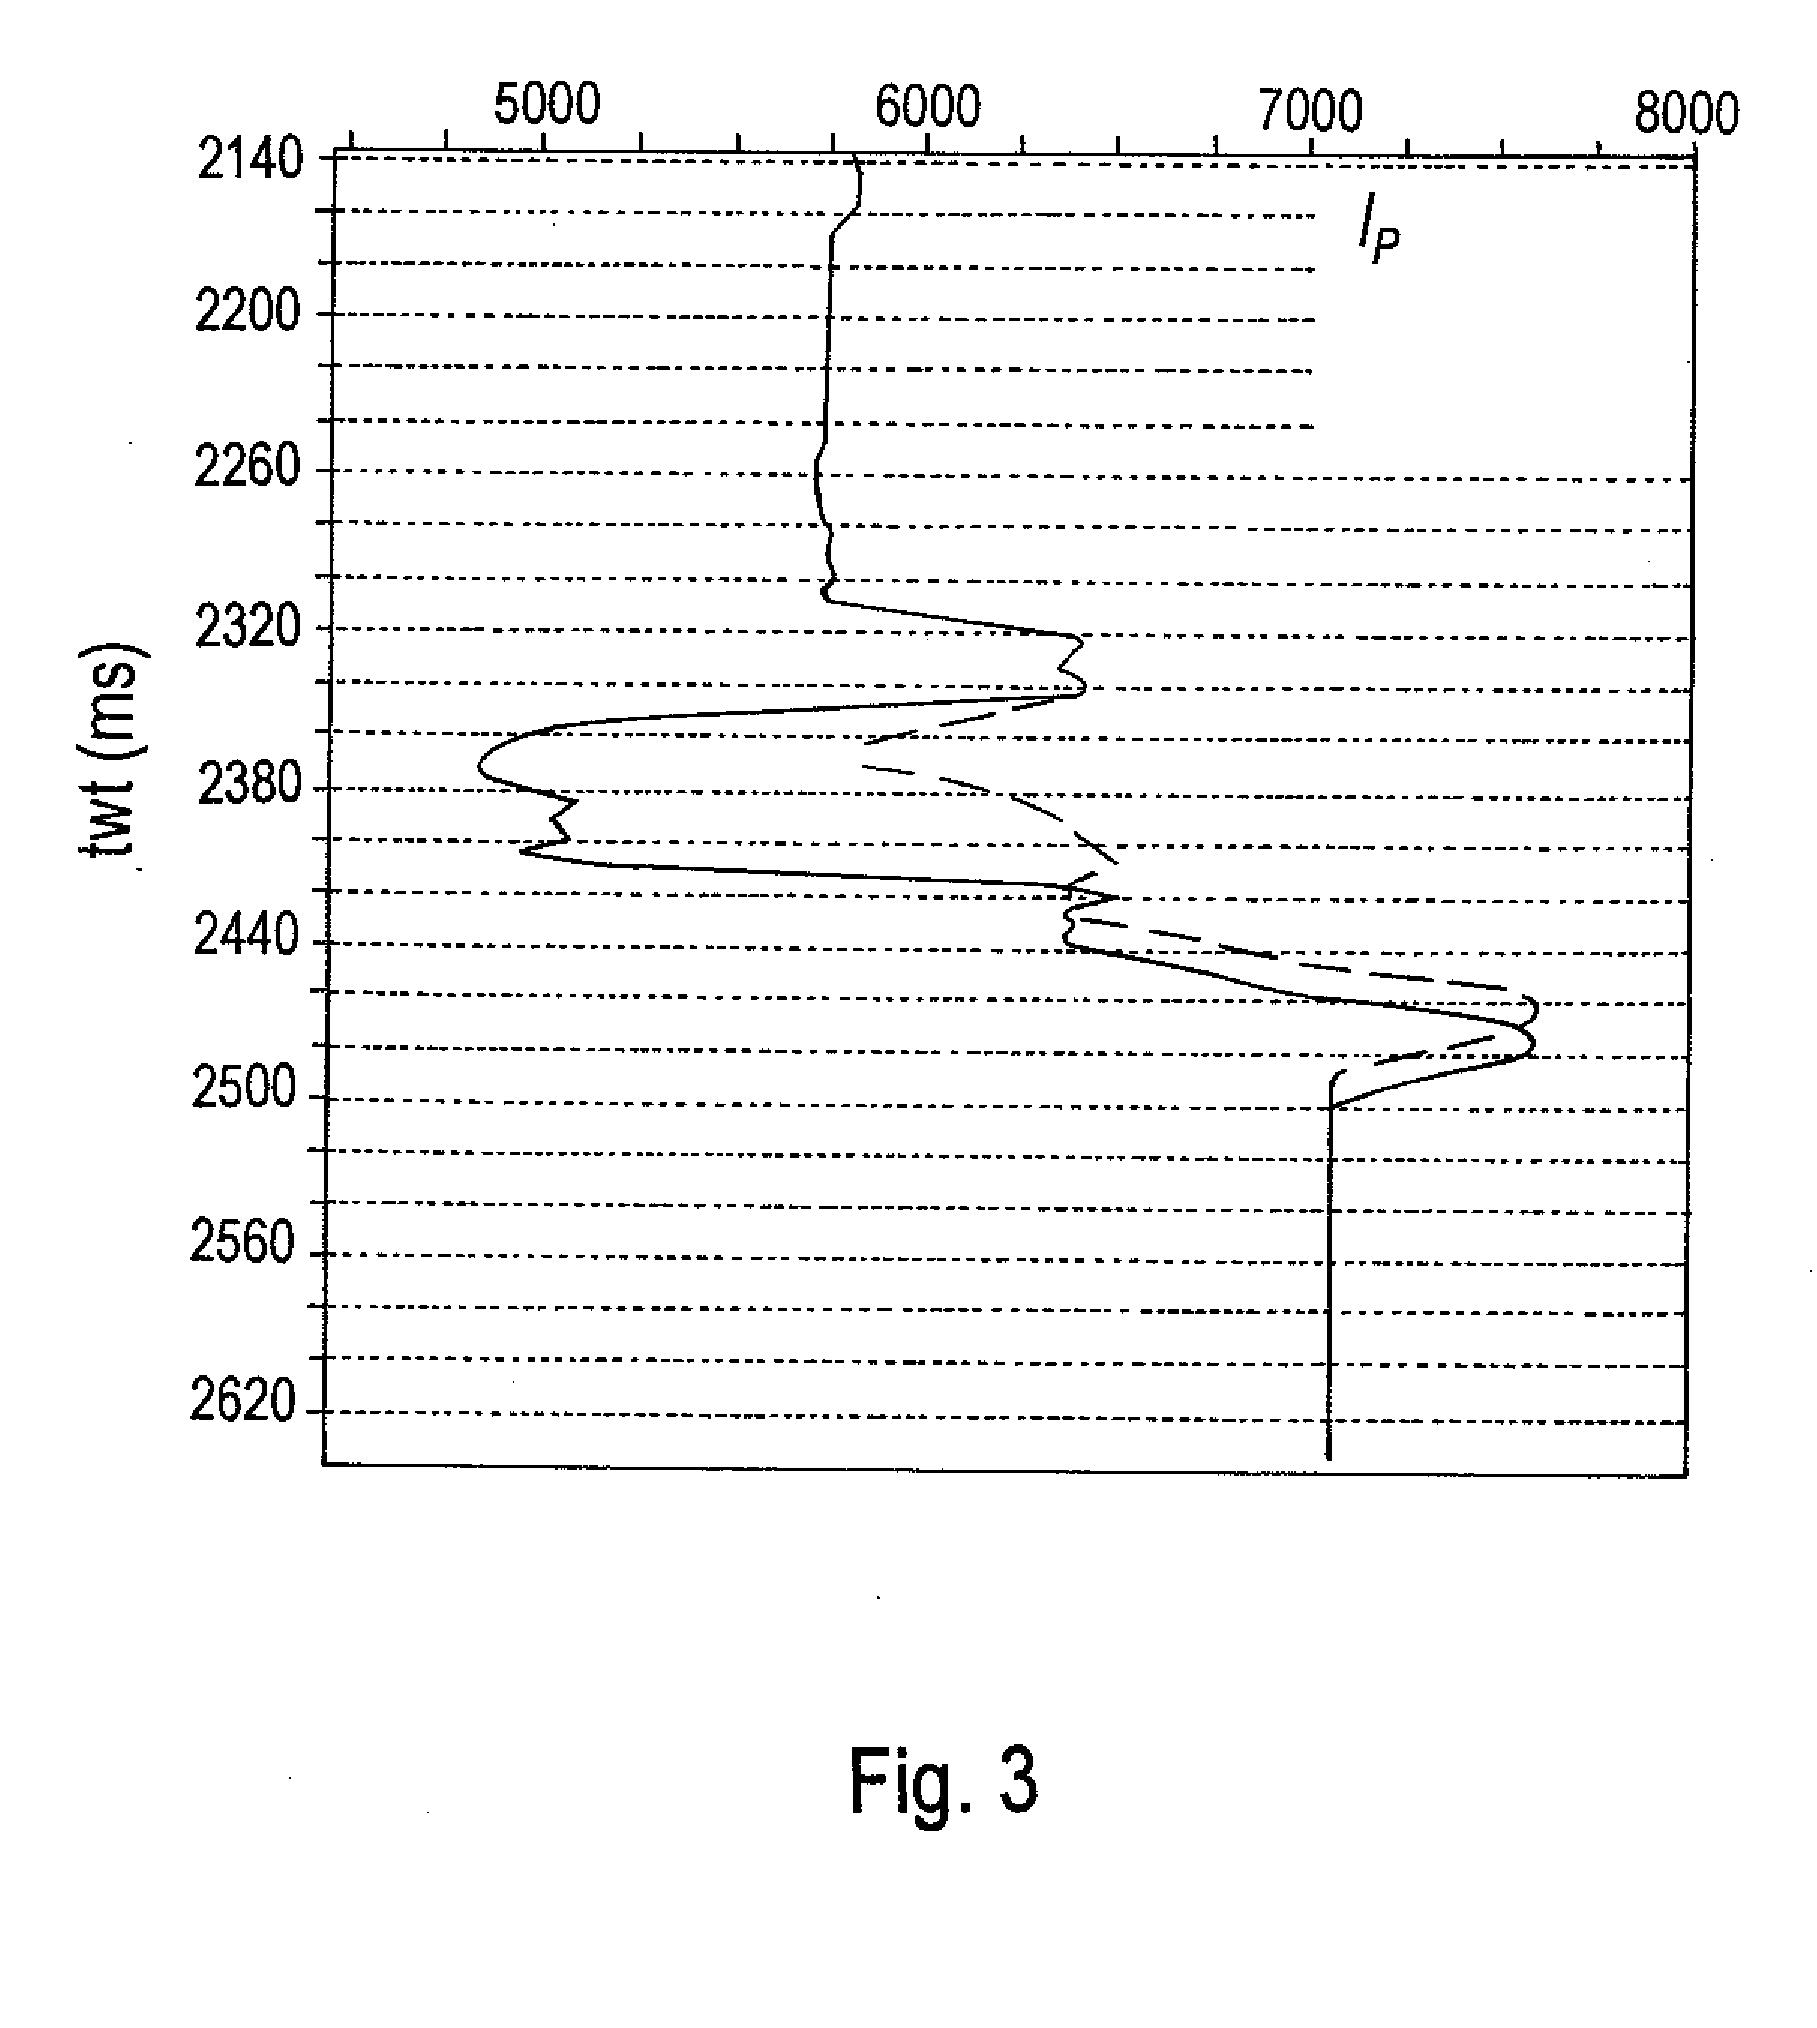 Method of Joint Inversion of Seismic Data Represented on Different Time Scales